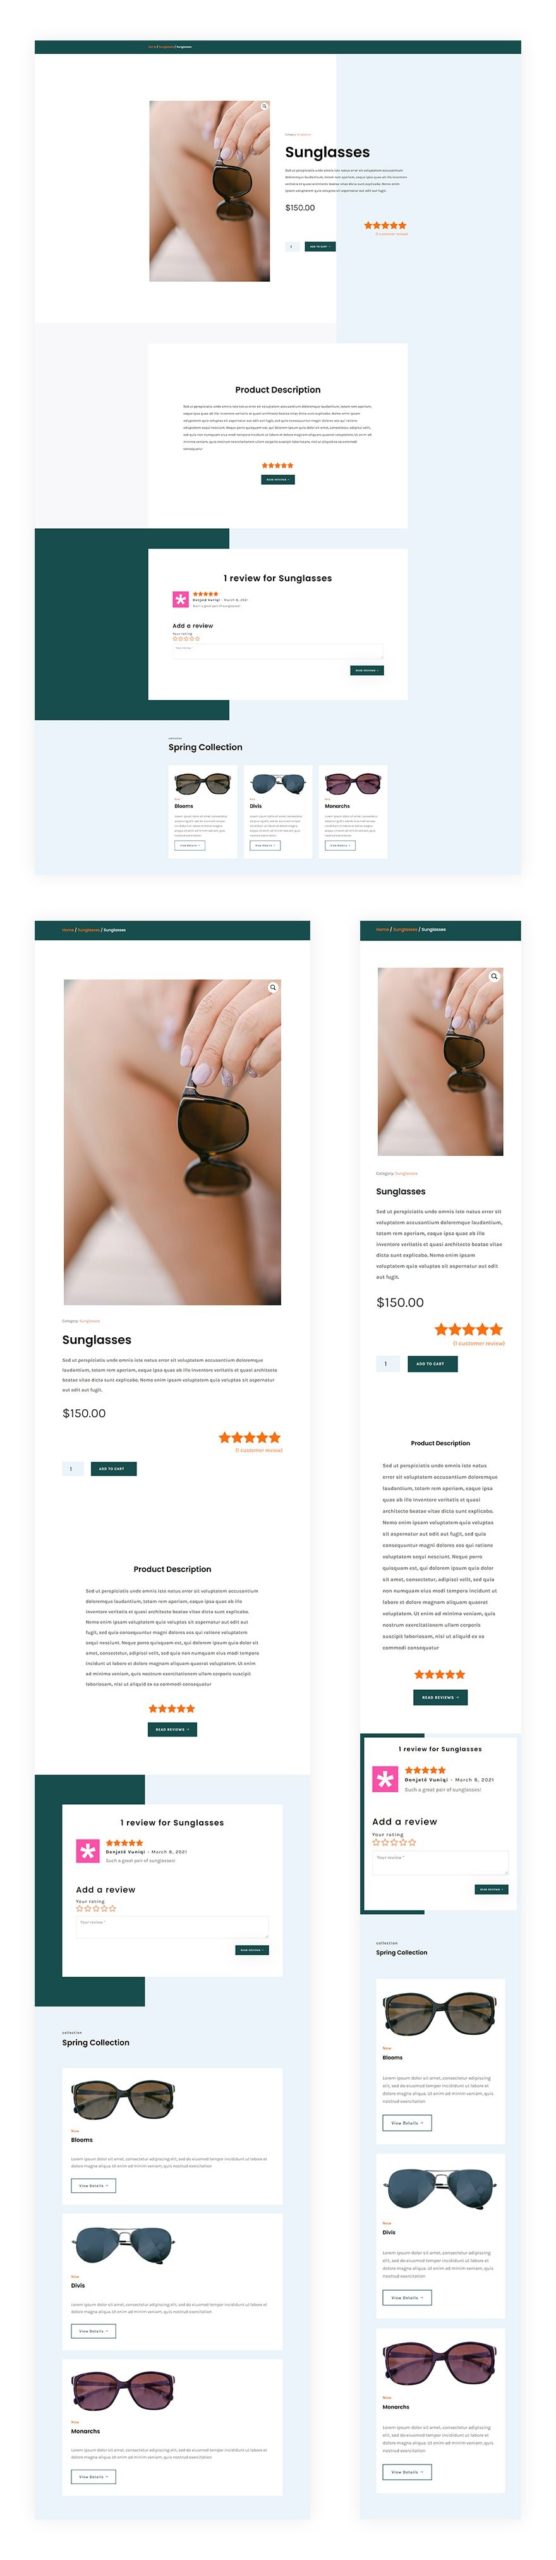 sunglasses shop product page template